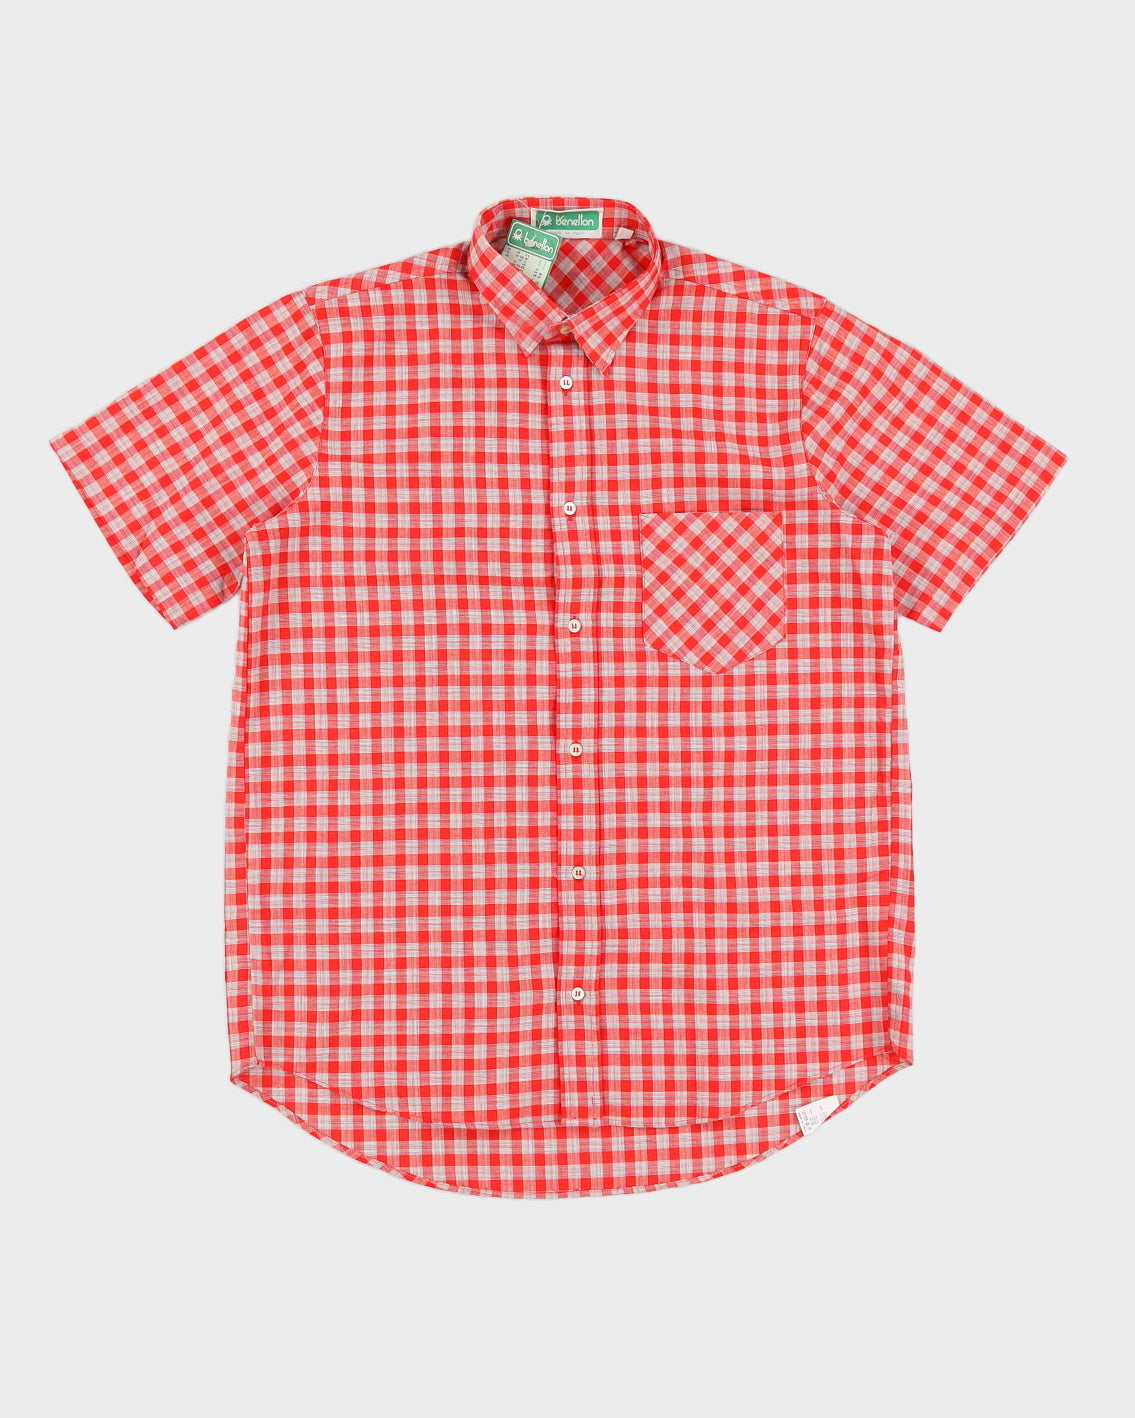 Vintage 80s Benetton Red Checked Short Sleeved Shirt Deadstock With Tags - M